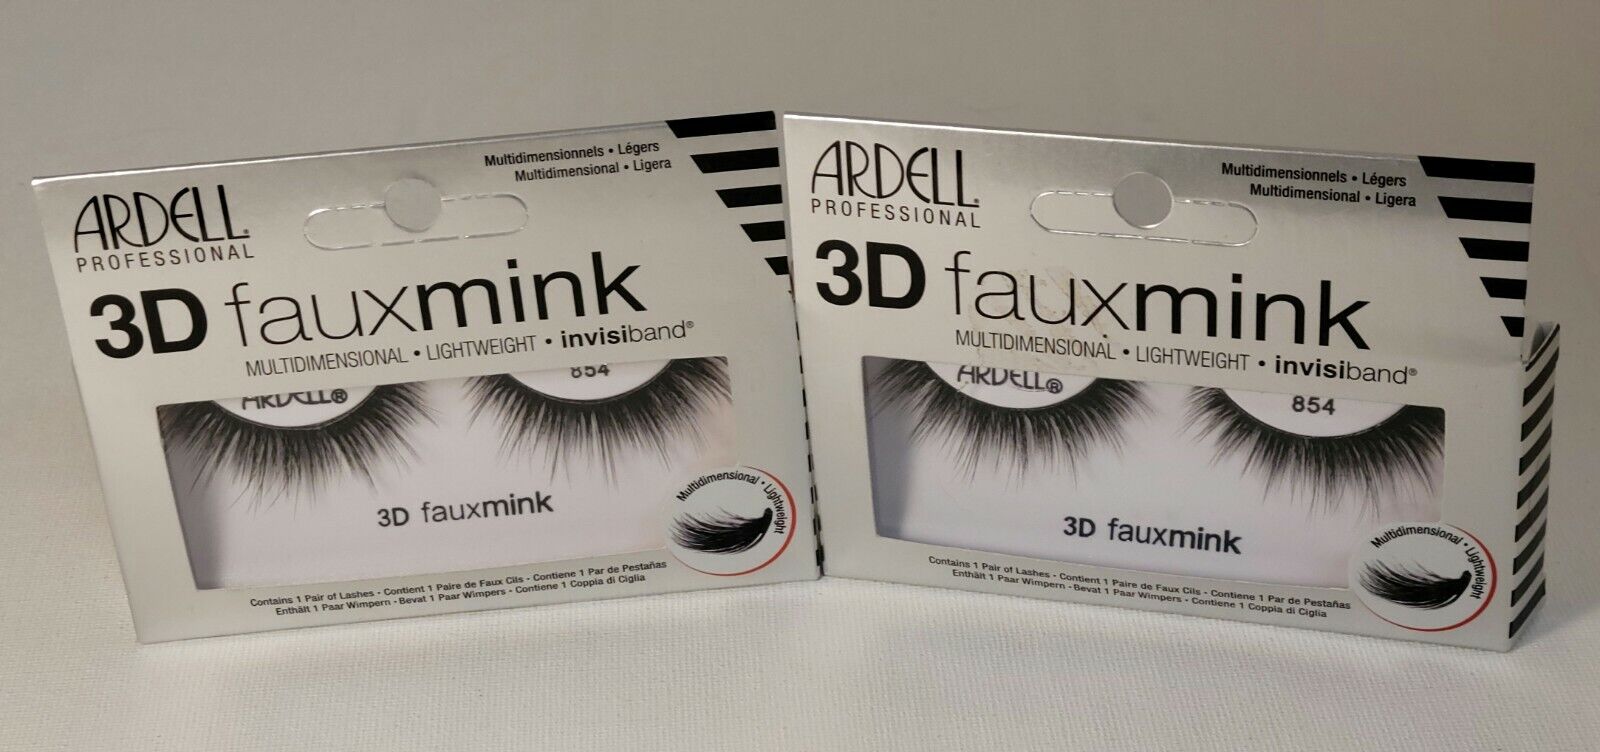 2 Pack Ardell Free Shipping Cheap Bargain Gift Professional 3D 854 Lightweight Fauxmink Lashes Ne Bargain sale